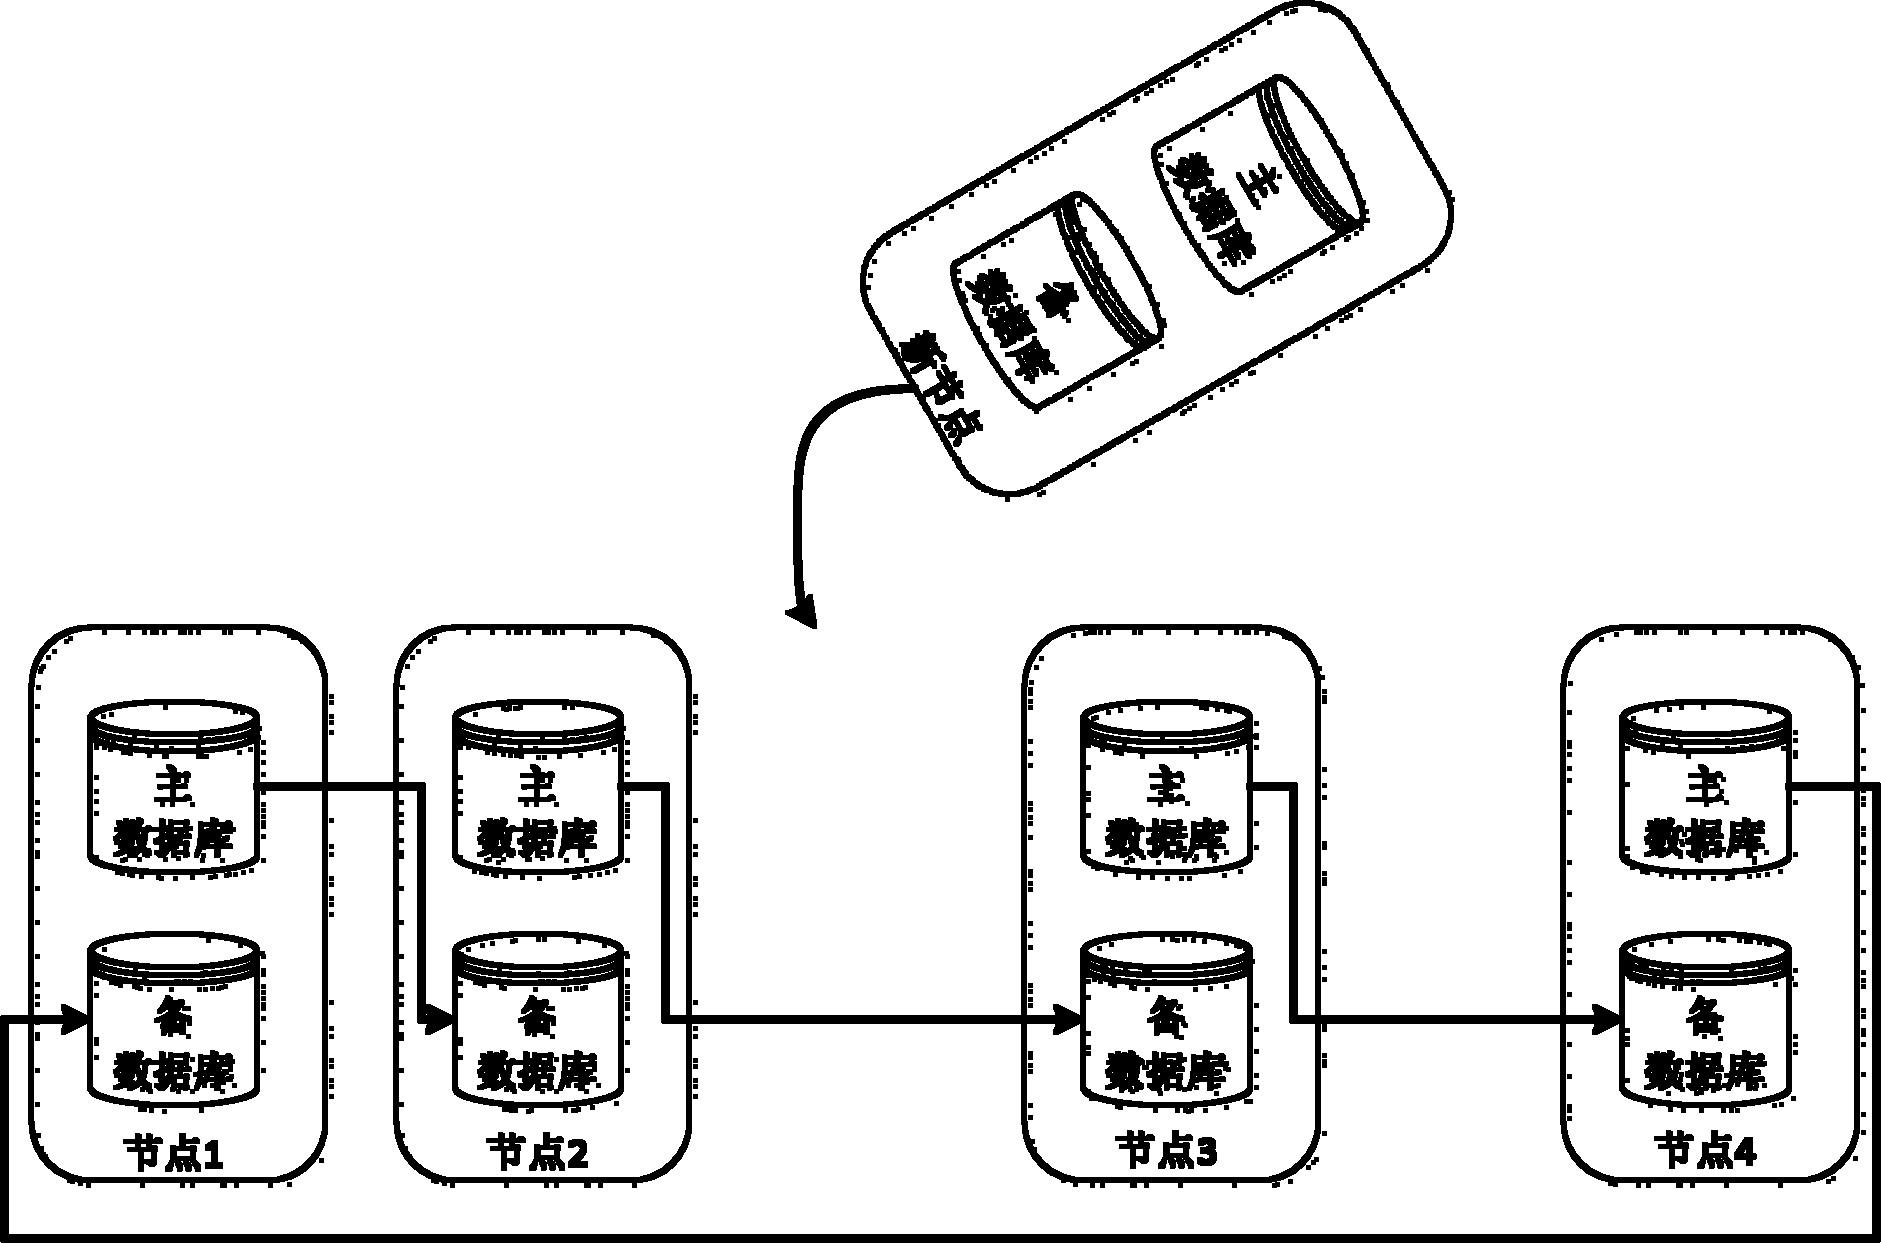 System and method for realizing distributed database